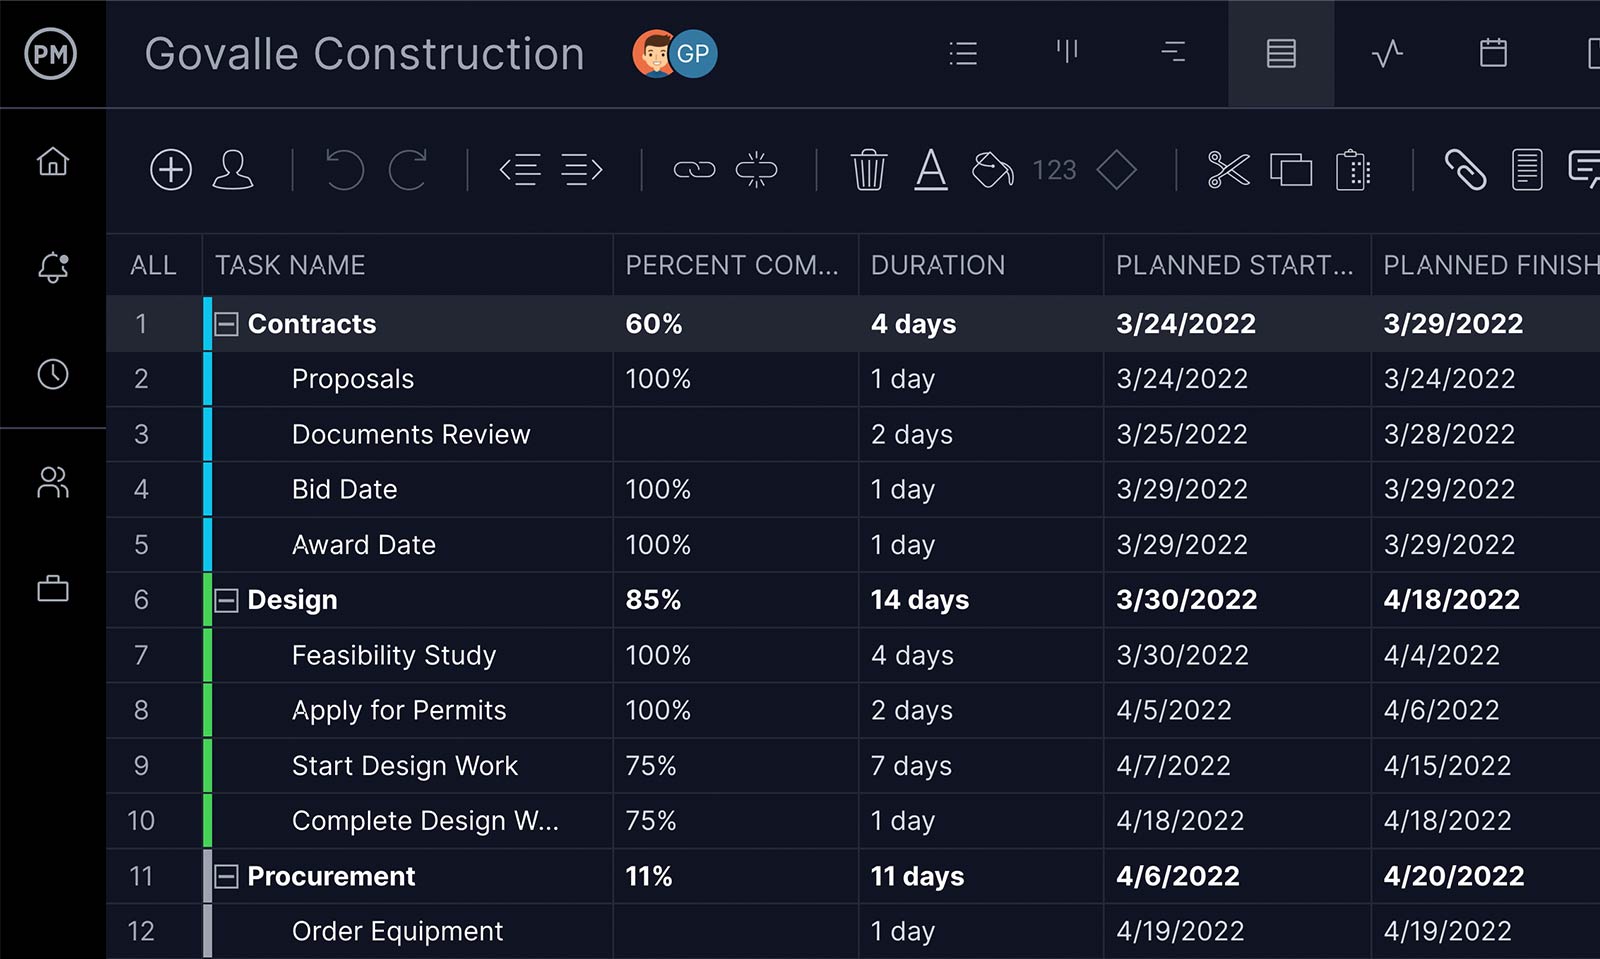 ProjectManager is a project workflow software equipped with a Sheet view for planning